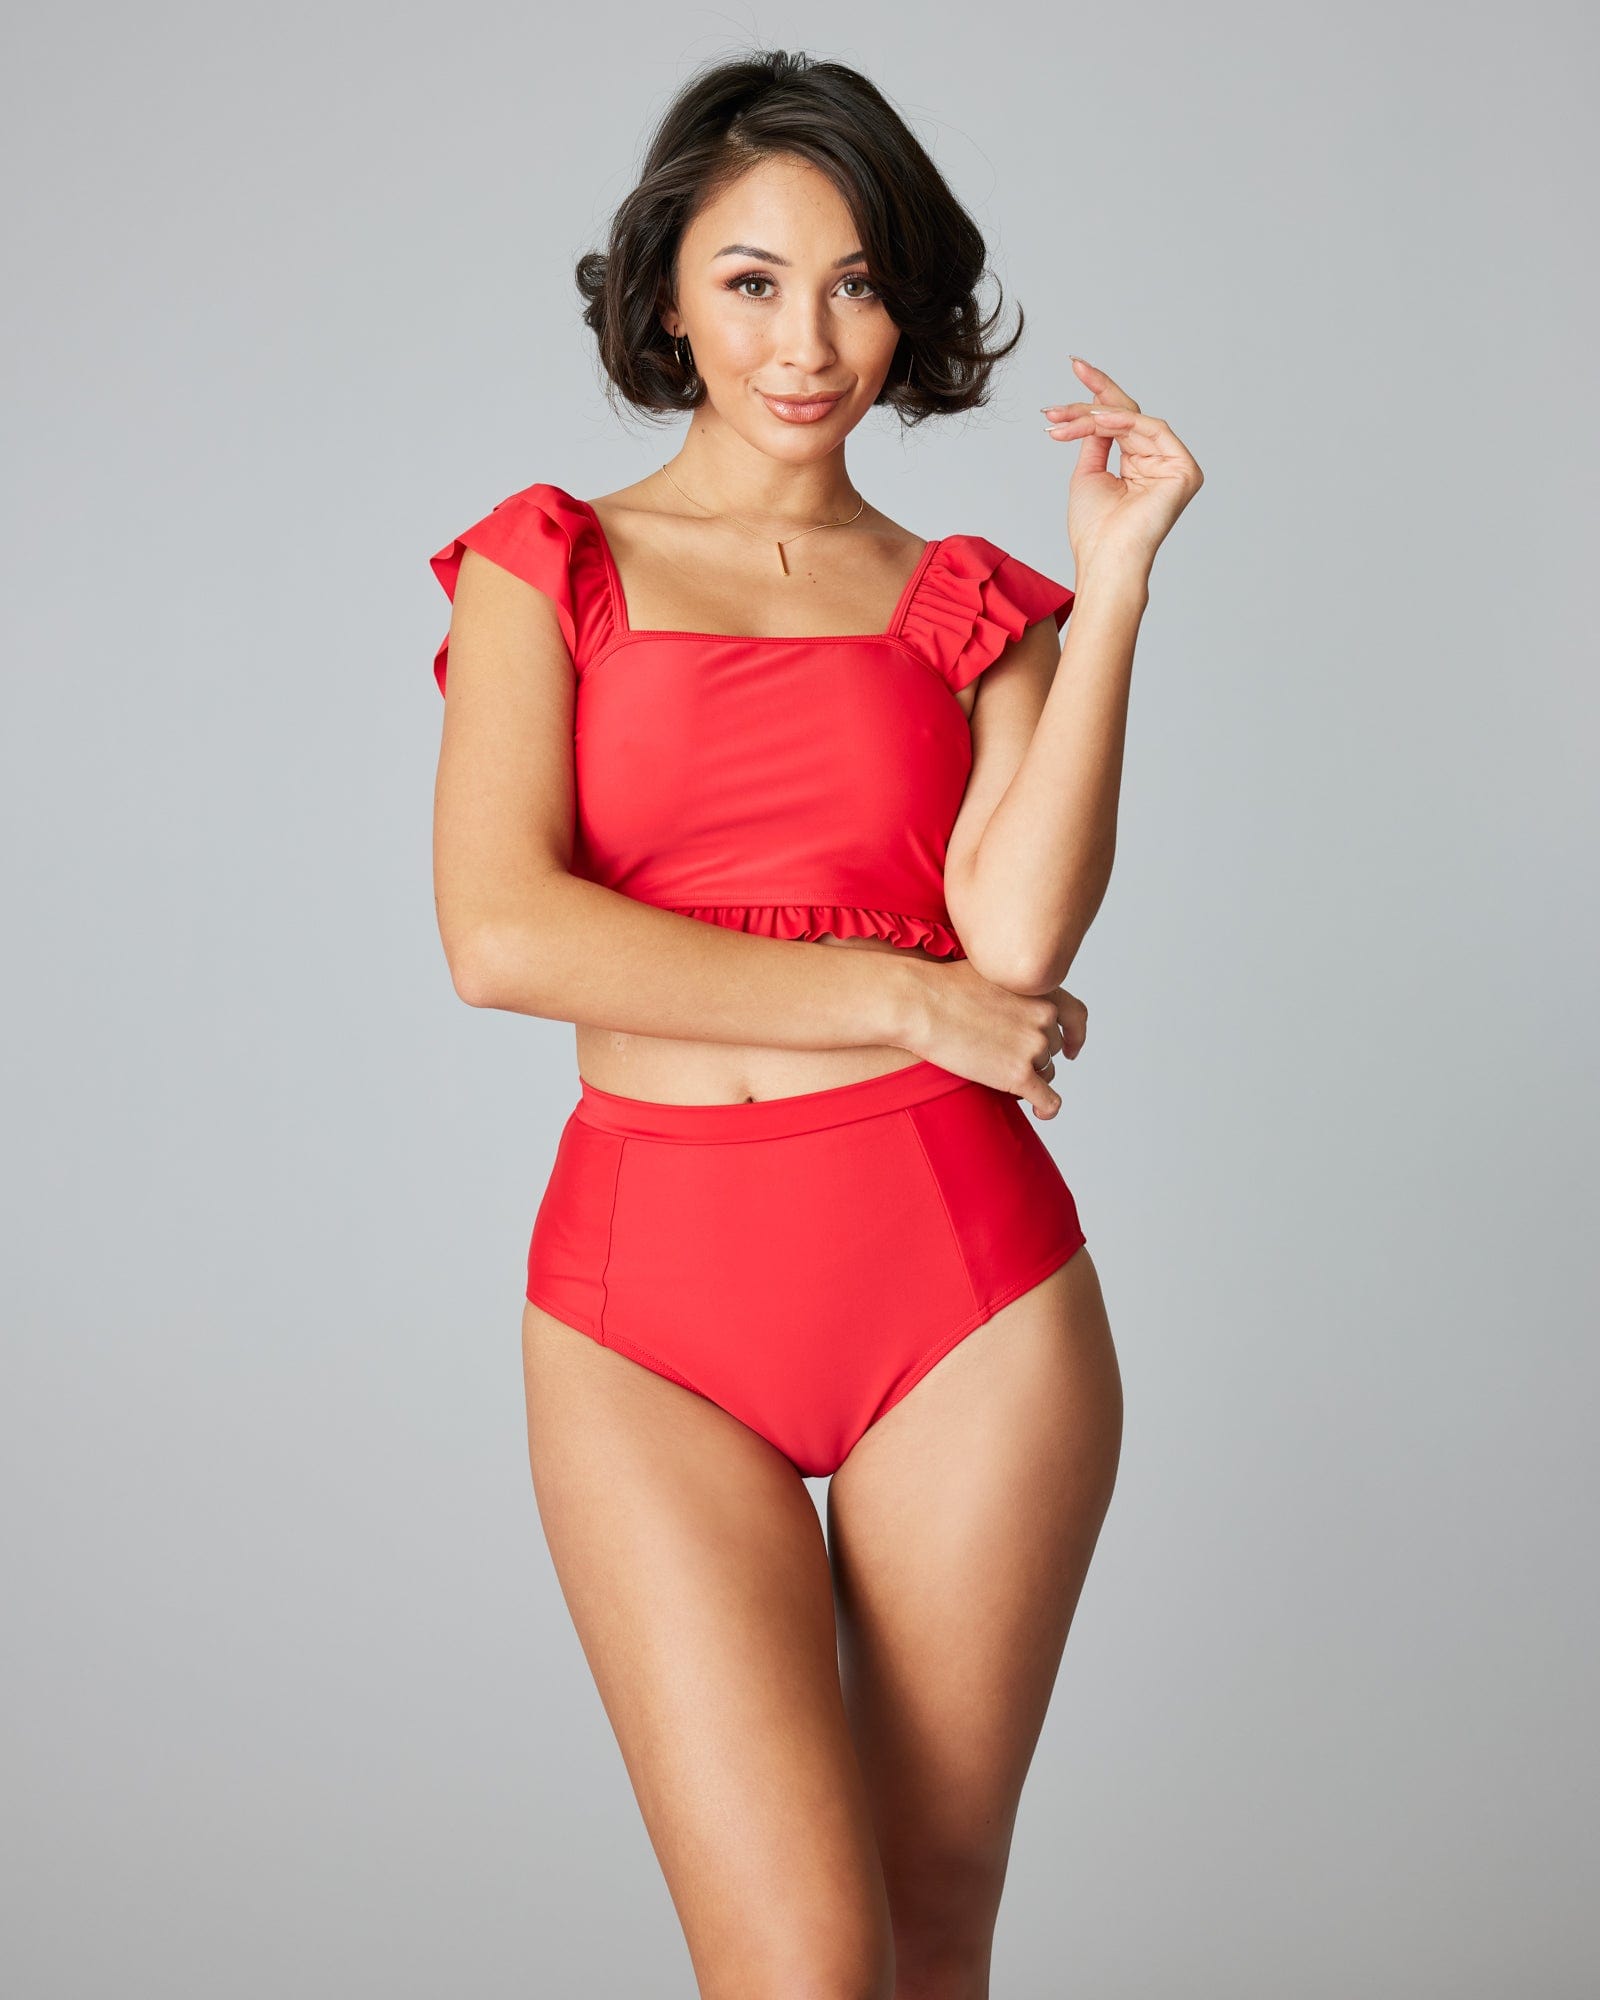 Woman in a two-piece swimsuit with red bottoms.